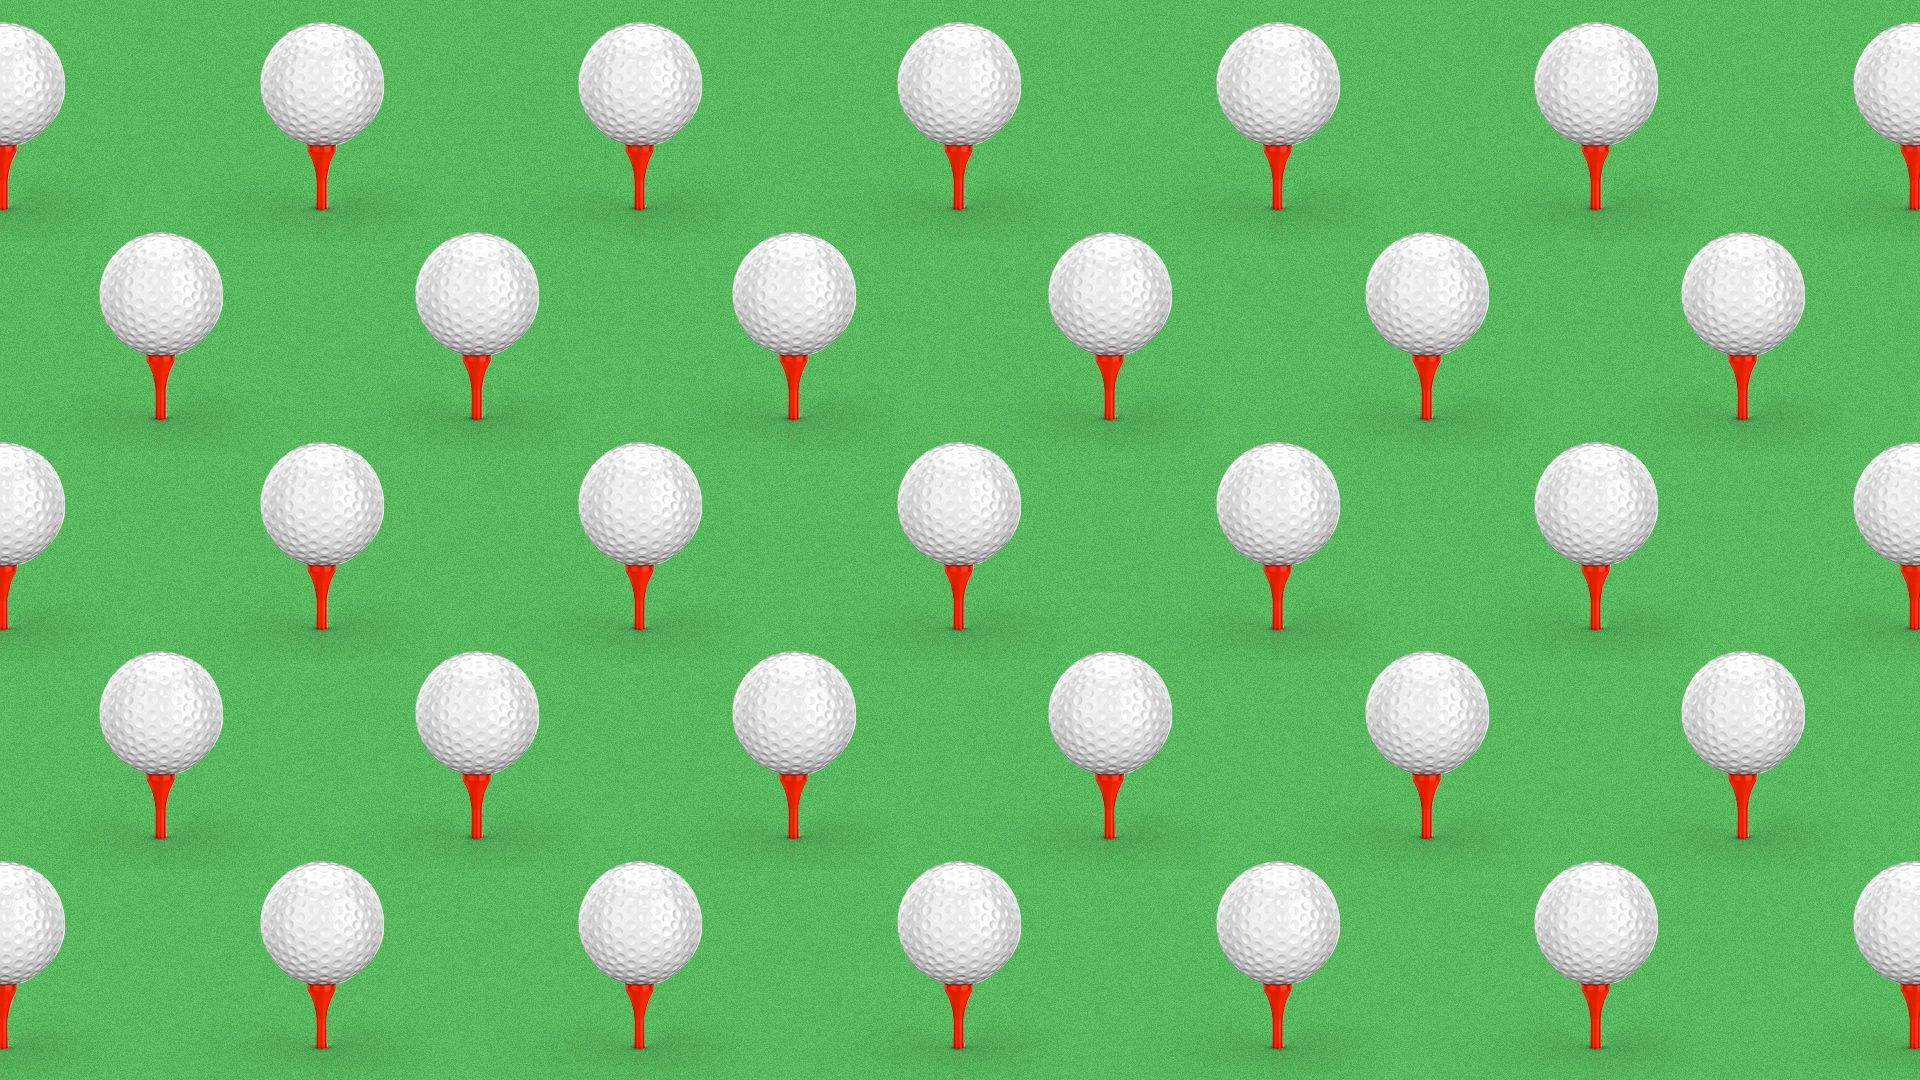 Illustration of a pattern of golf balls on tees.   